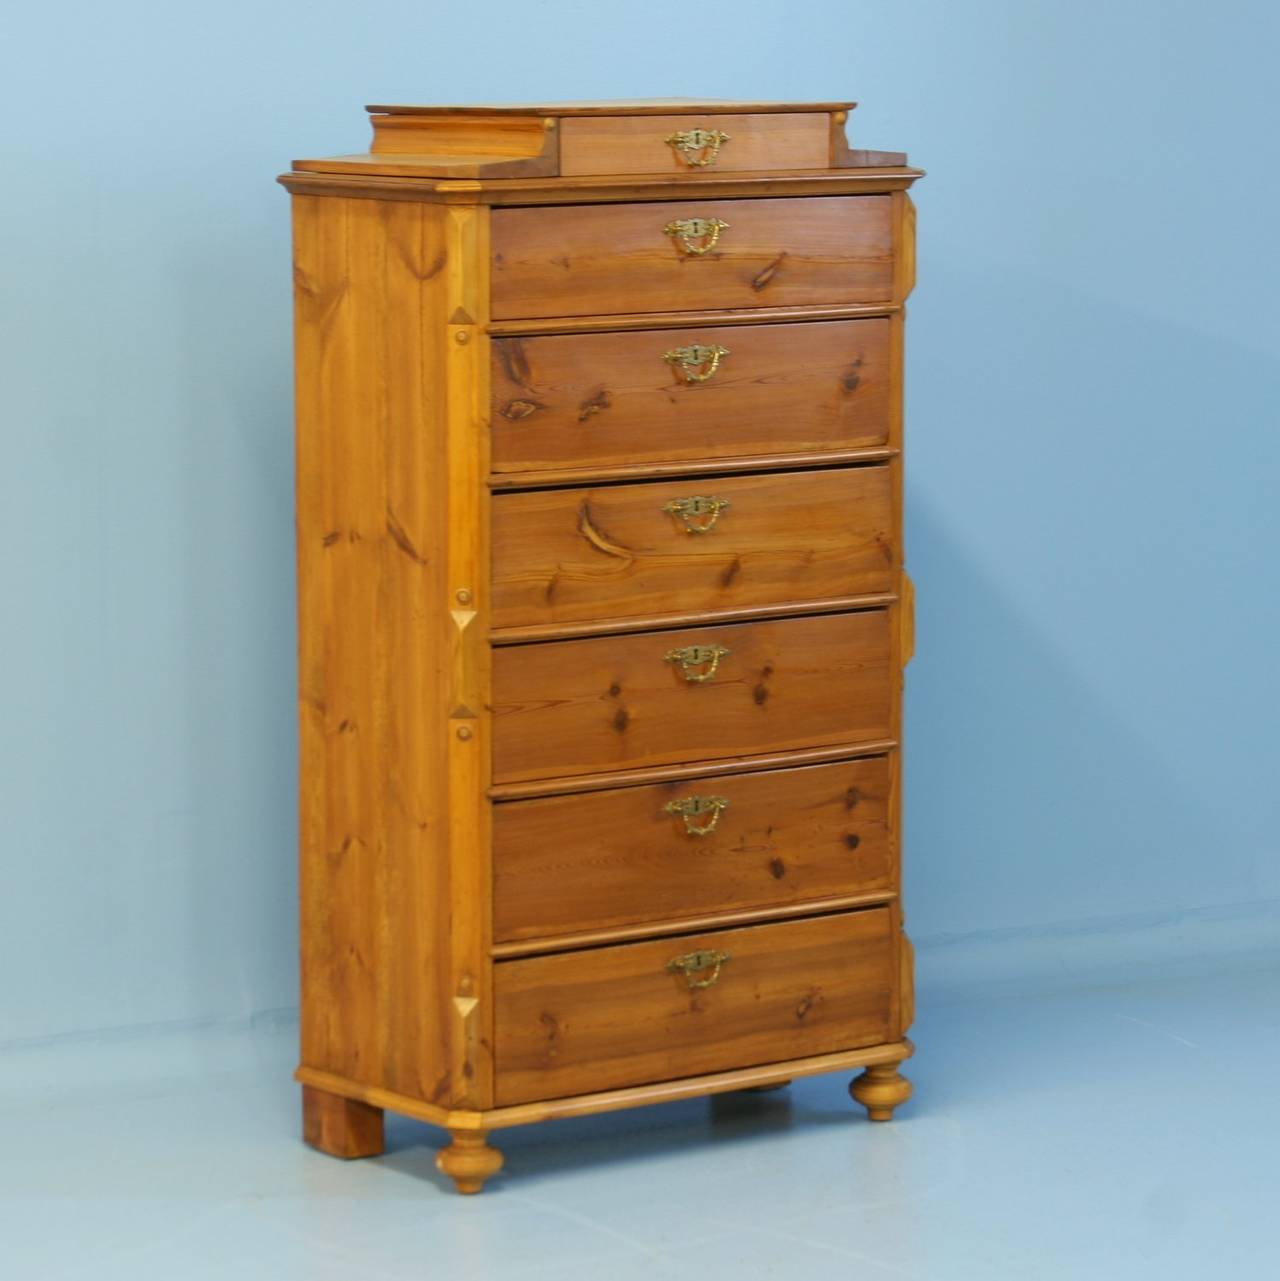 This pine chest of drawers or 